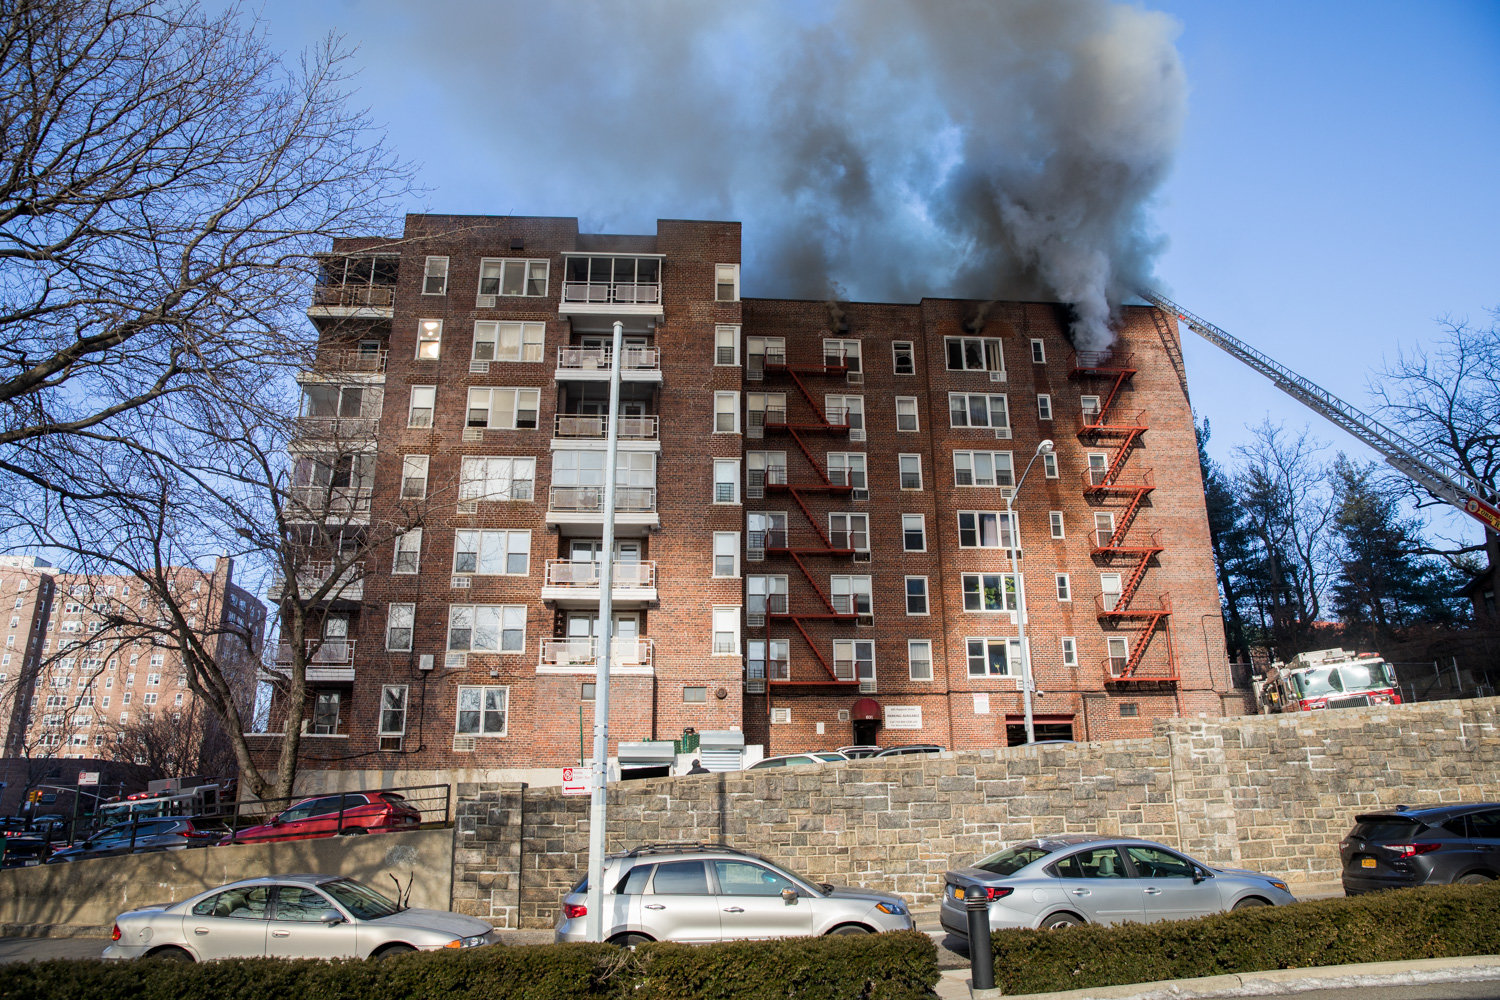 Billowing smoke casts a shadow over 601 Kappock St., where a fire broke out Tuesday morning. The three-alarm blaze drew more than 100 emergency personnel. No injuries were reported aside from a minor one sustained by a firefighter.